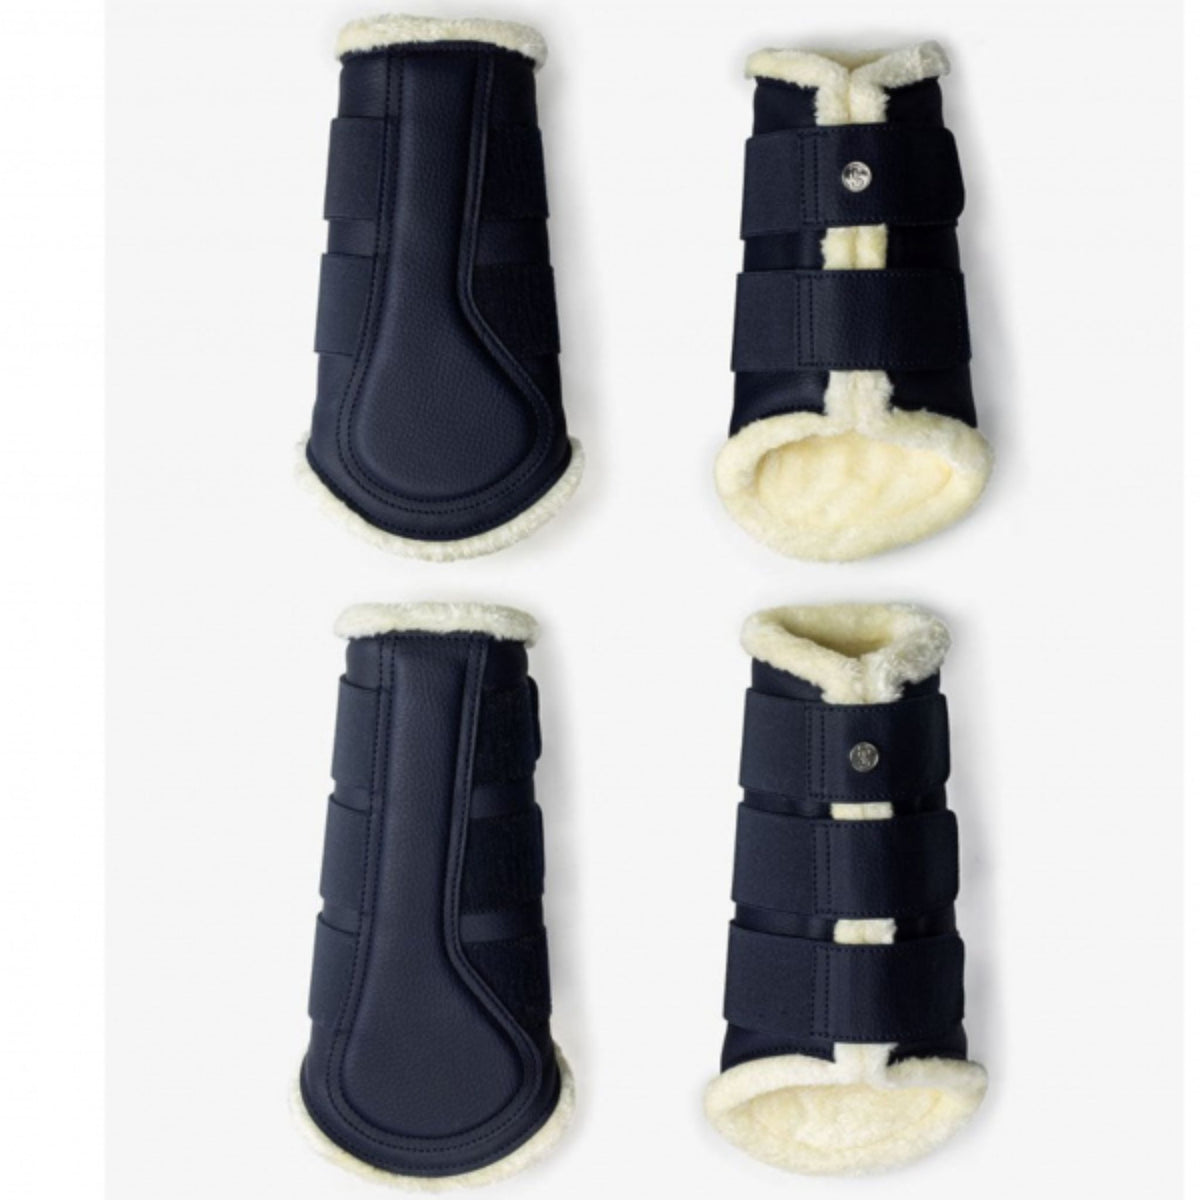 Deep blue brush boots with white inner fluff and a small silver PSOS logo detailing on the top straps